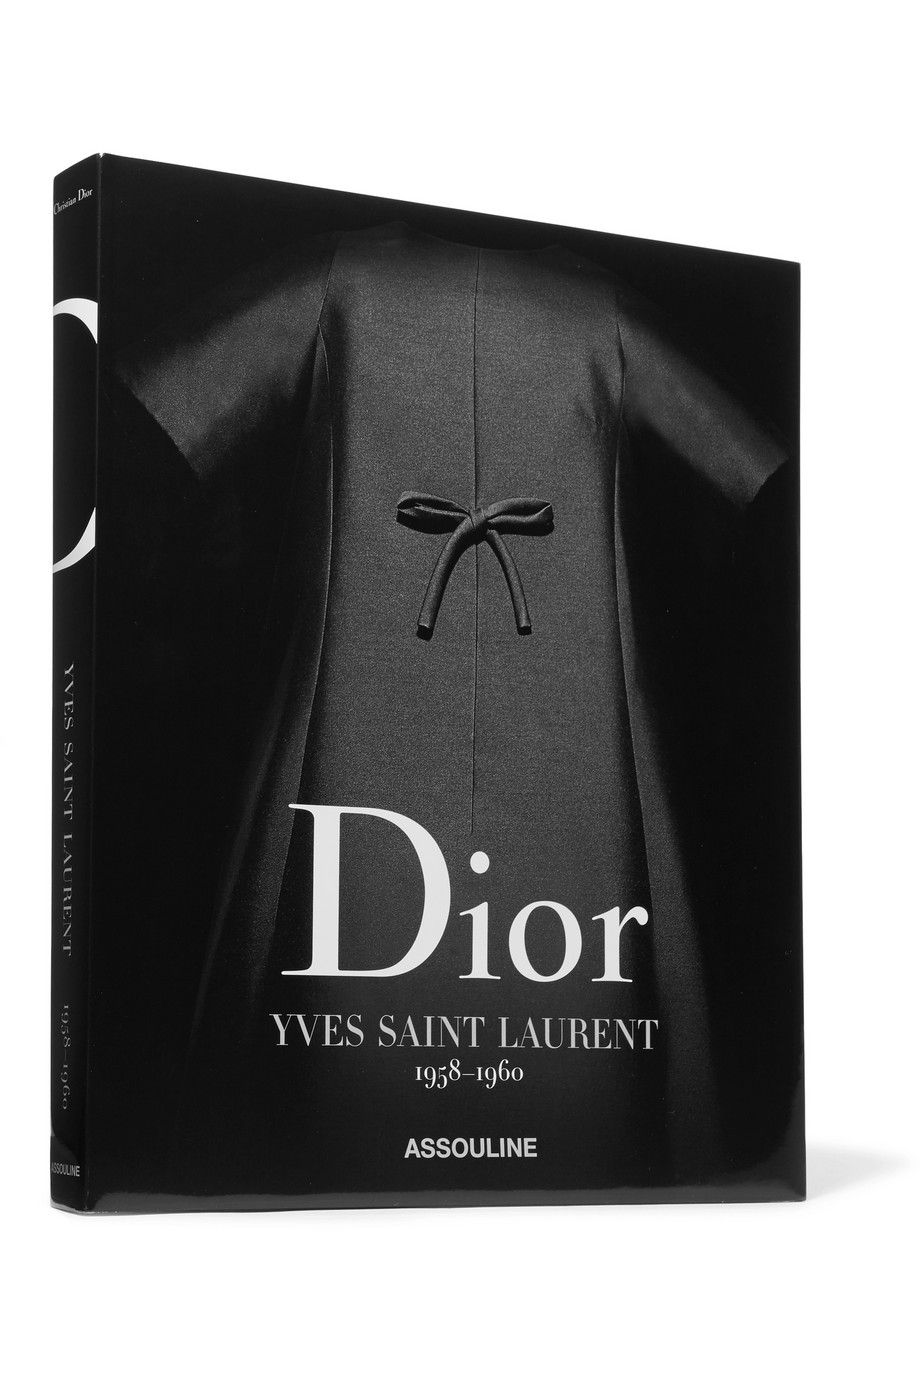 Dior by Yves Saint Laurent 1958-1960 by Laurence Benaïm hardcover book